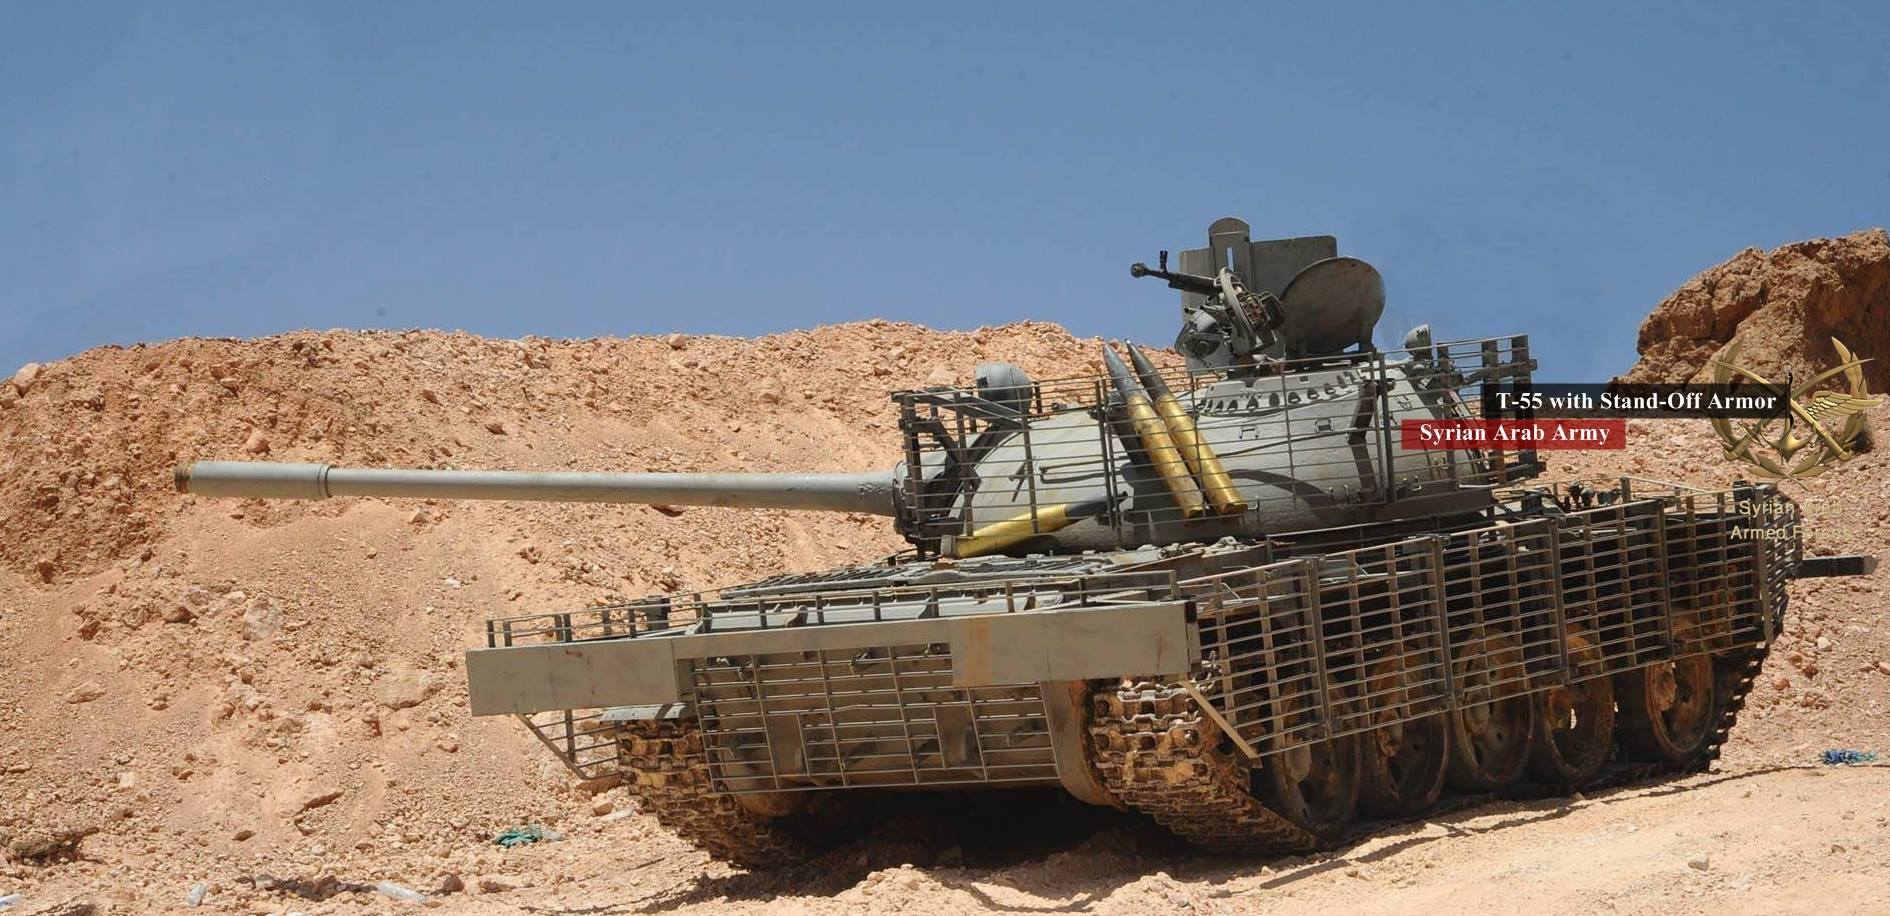 A T-55 fitted with cage armor, similar to the above. A new fender can be seen on the far right of the front of the hull. Additional munitions are clearly stored in the turret cage.